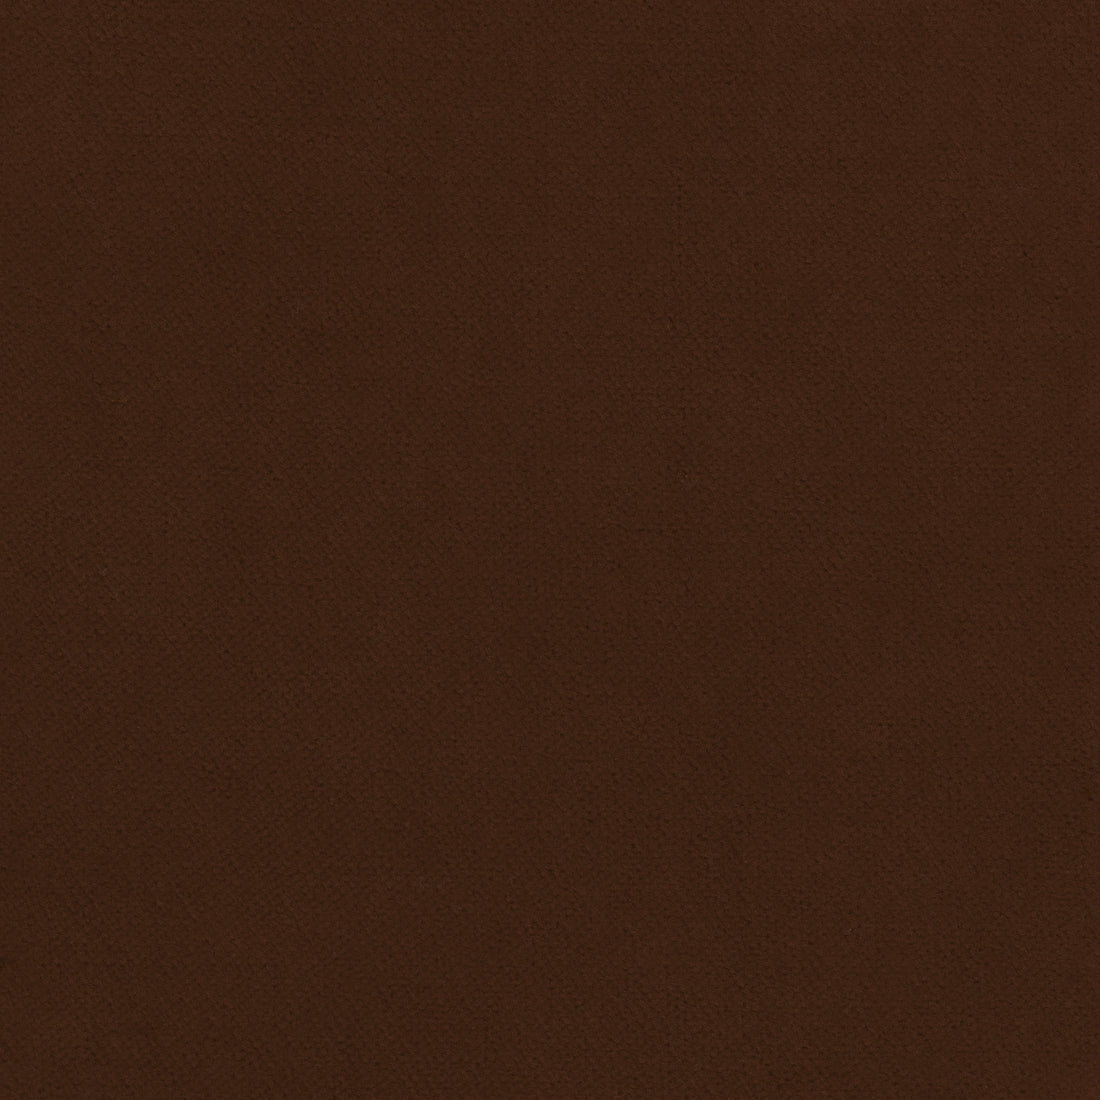 Club Velvet fabric in espresso color - pattern number W7227 - by Thibaut in the Club Velvet collection